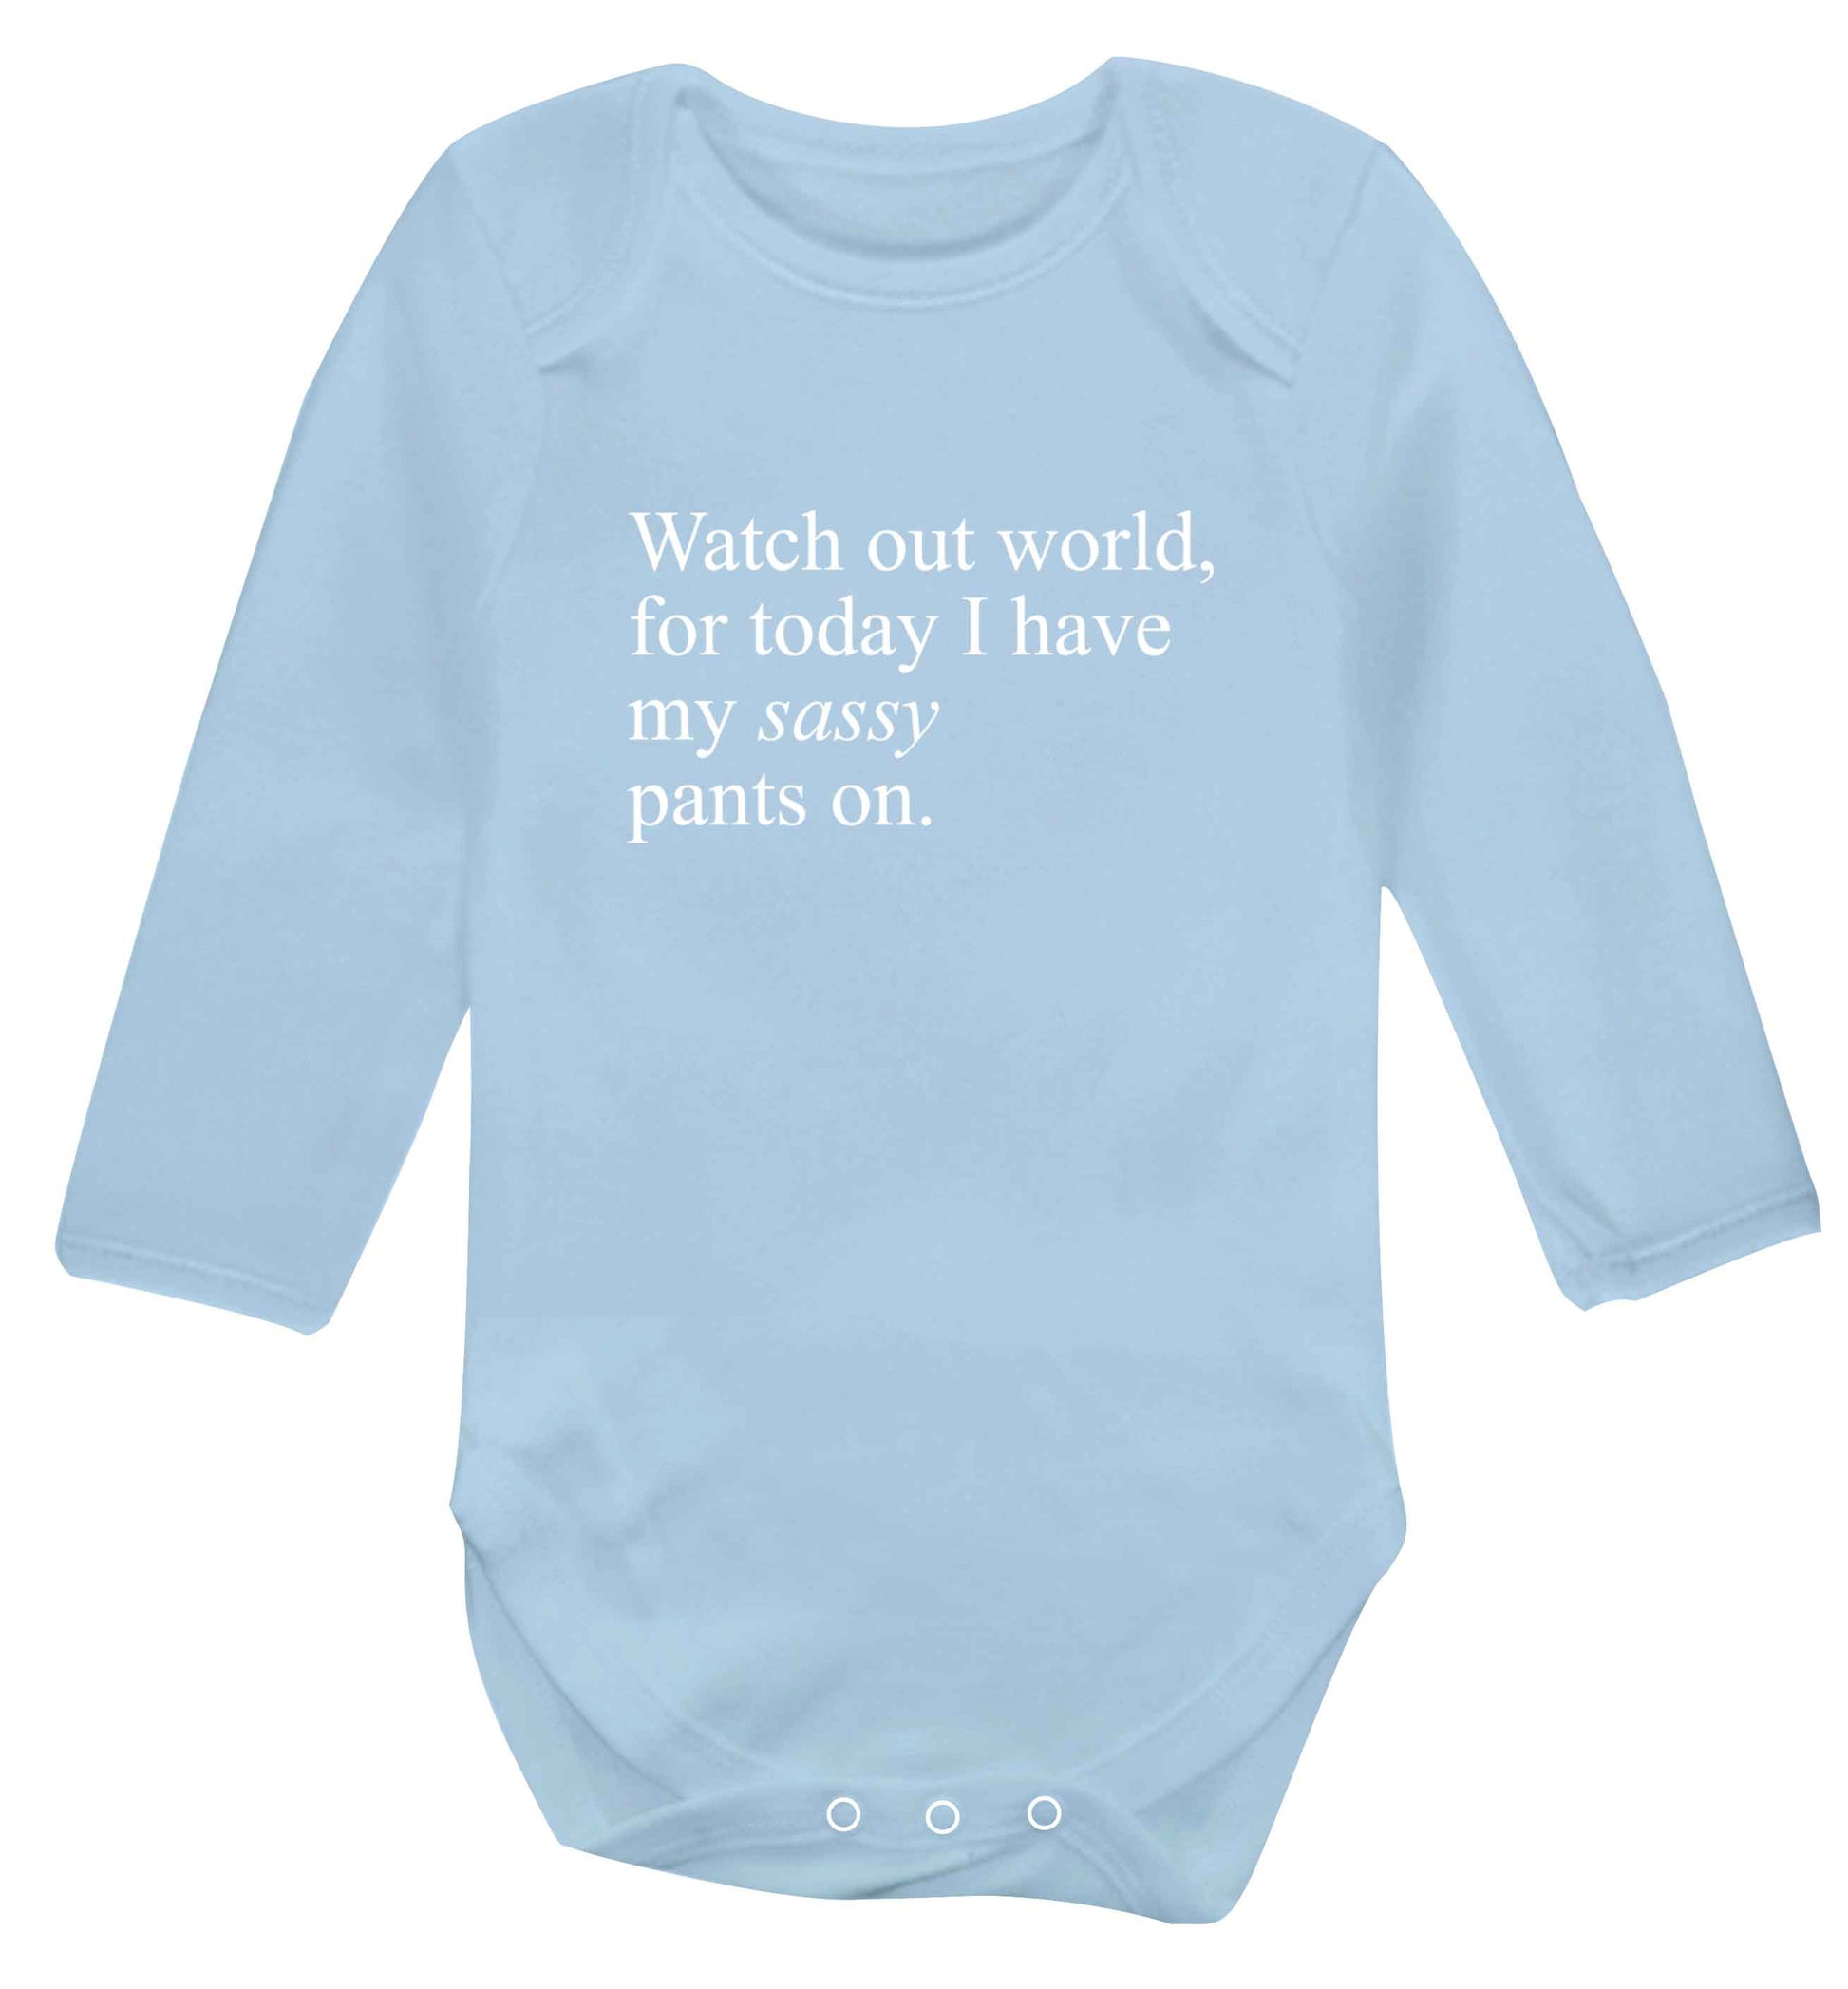 Watch out world for today I have my sassy pants on baby vest long sleeved pale blue 6-12 months